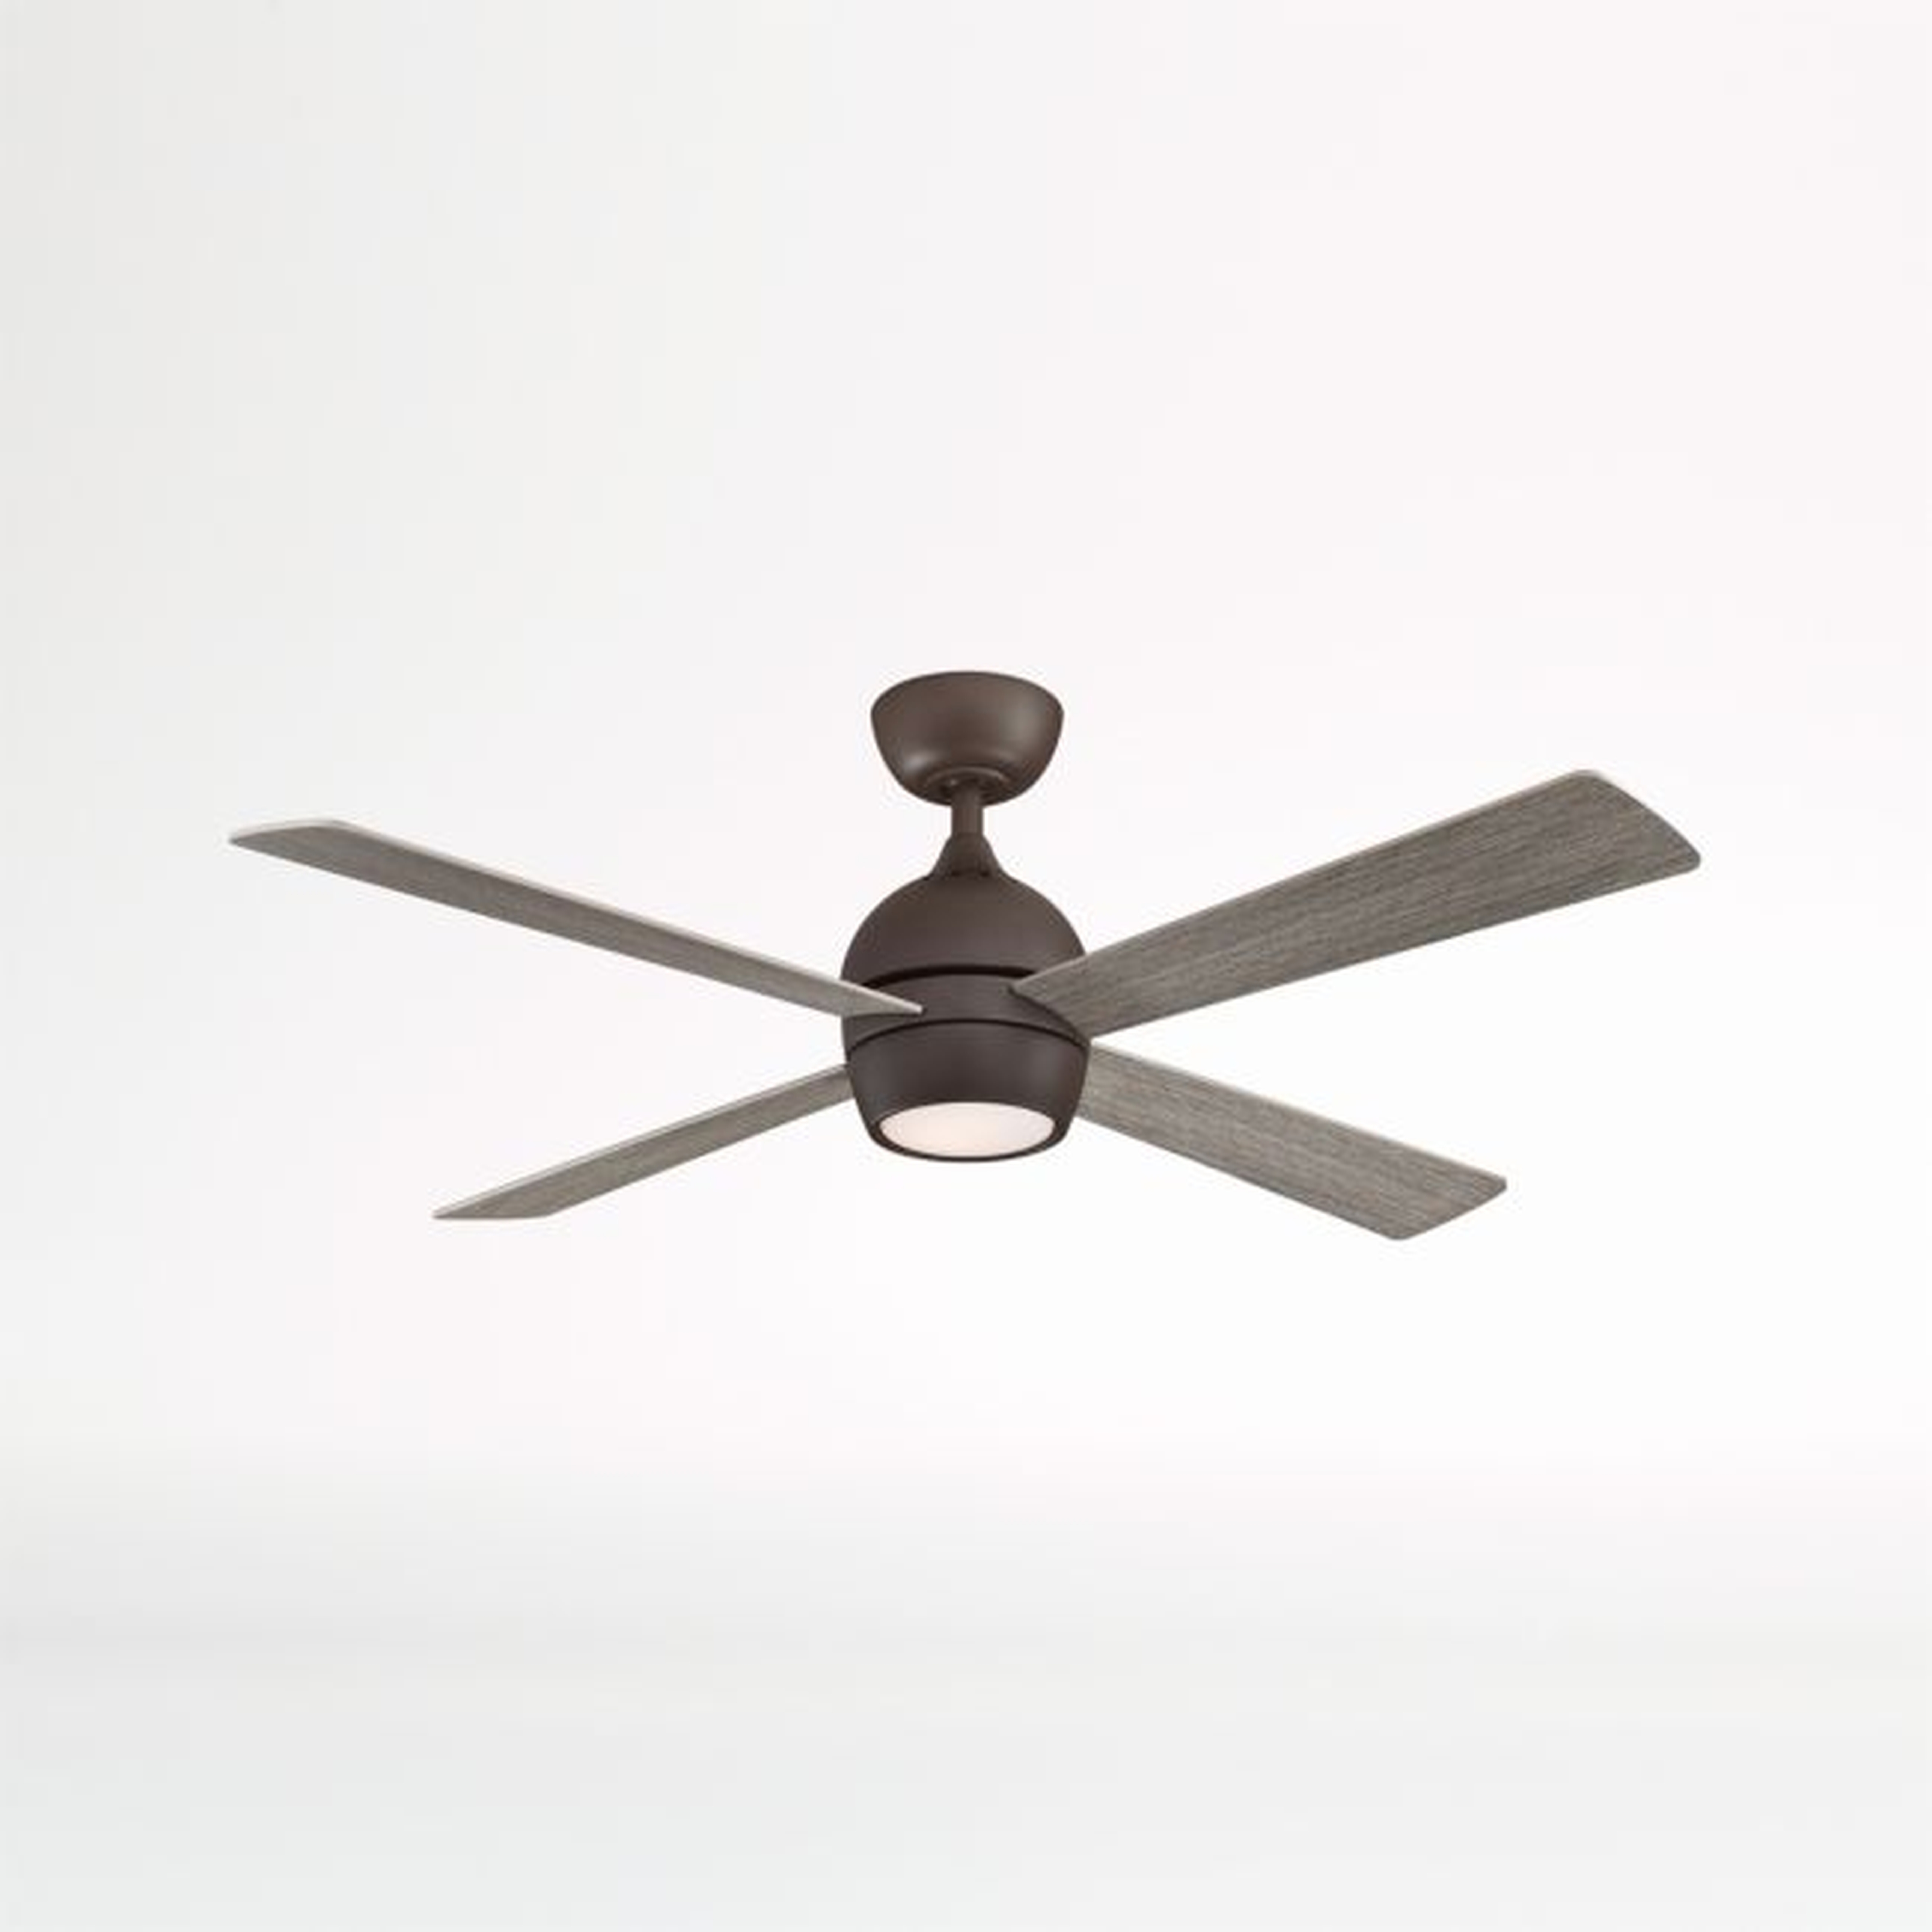 Fanimation Kwad 52" Matte Greige Ceiling Fan with Reversible Blades & LED Light Kit - Crate and Barrel